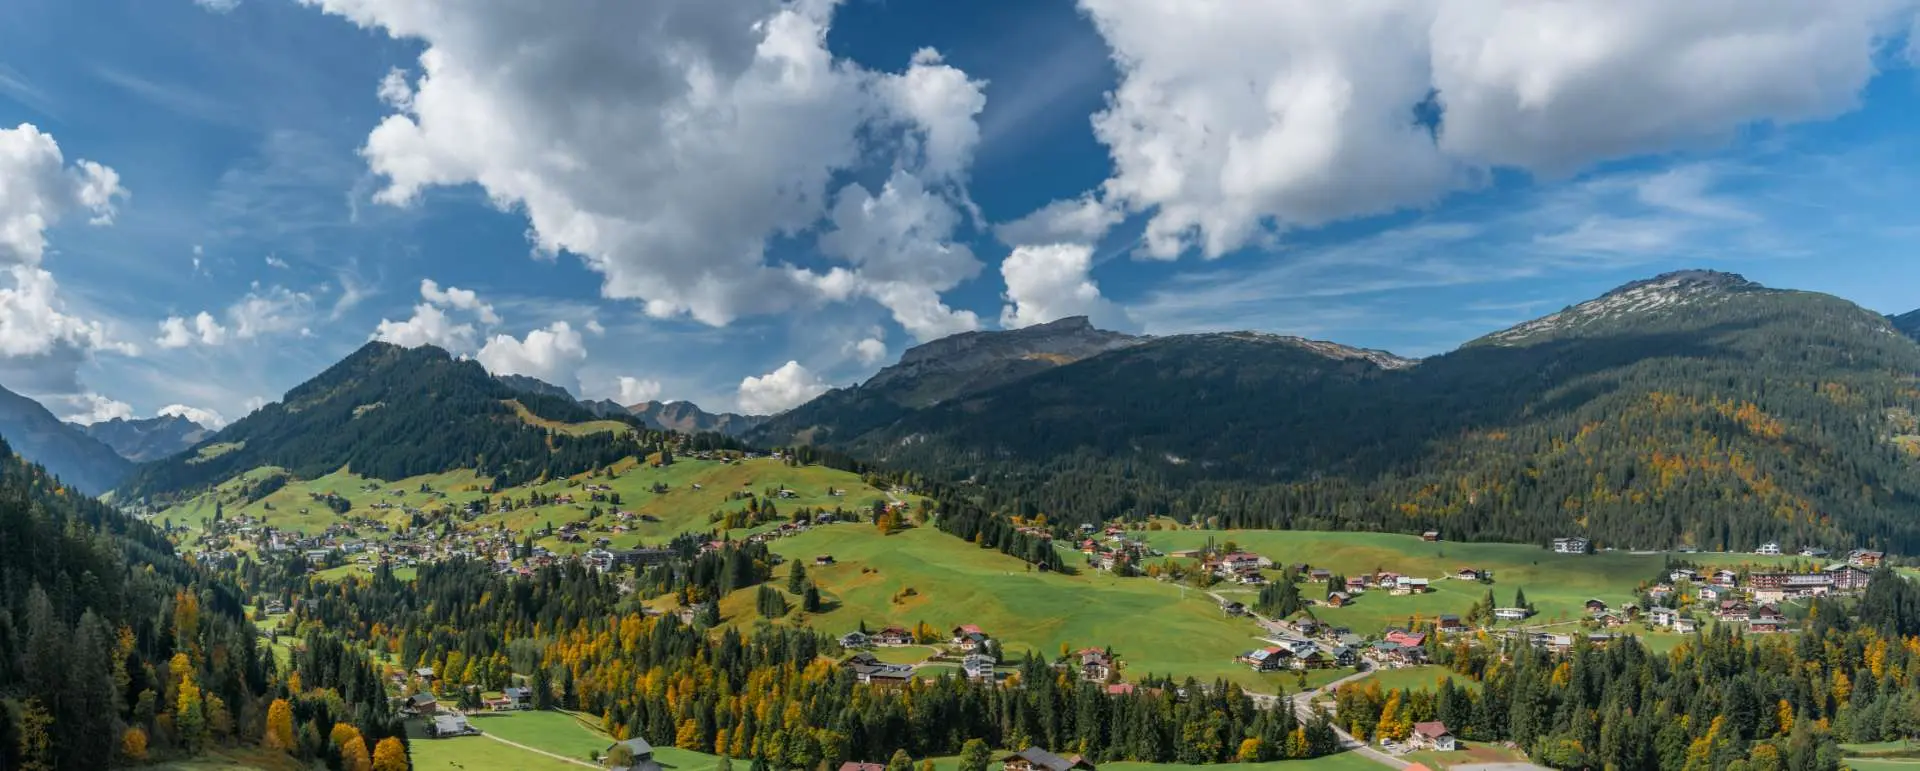 Kleinwalsertal - the destination with disabled-friendly accommodations